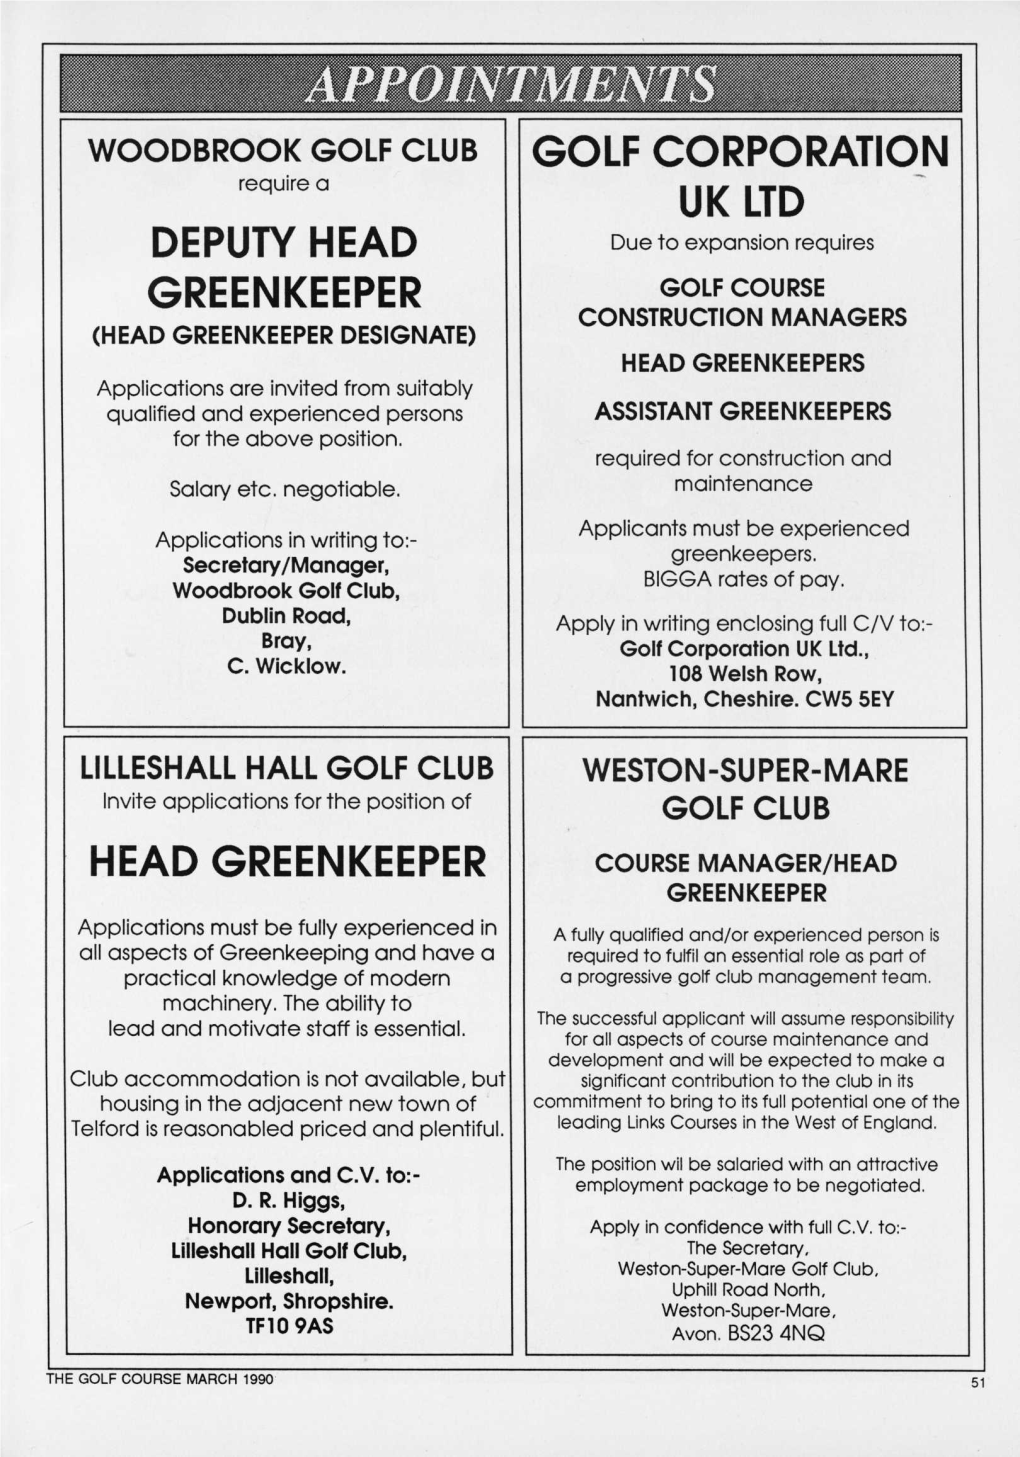 LILLESHALL HALL GOLF CLUB WESTON-SUPER-MARE Invite Applications for the Position of GOLF CLUB HEAD GREENKEEPER COURSE MANAGER/HEAD GREENKEEPER